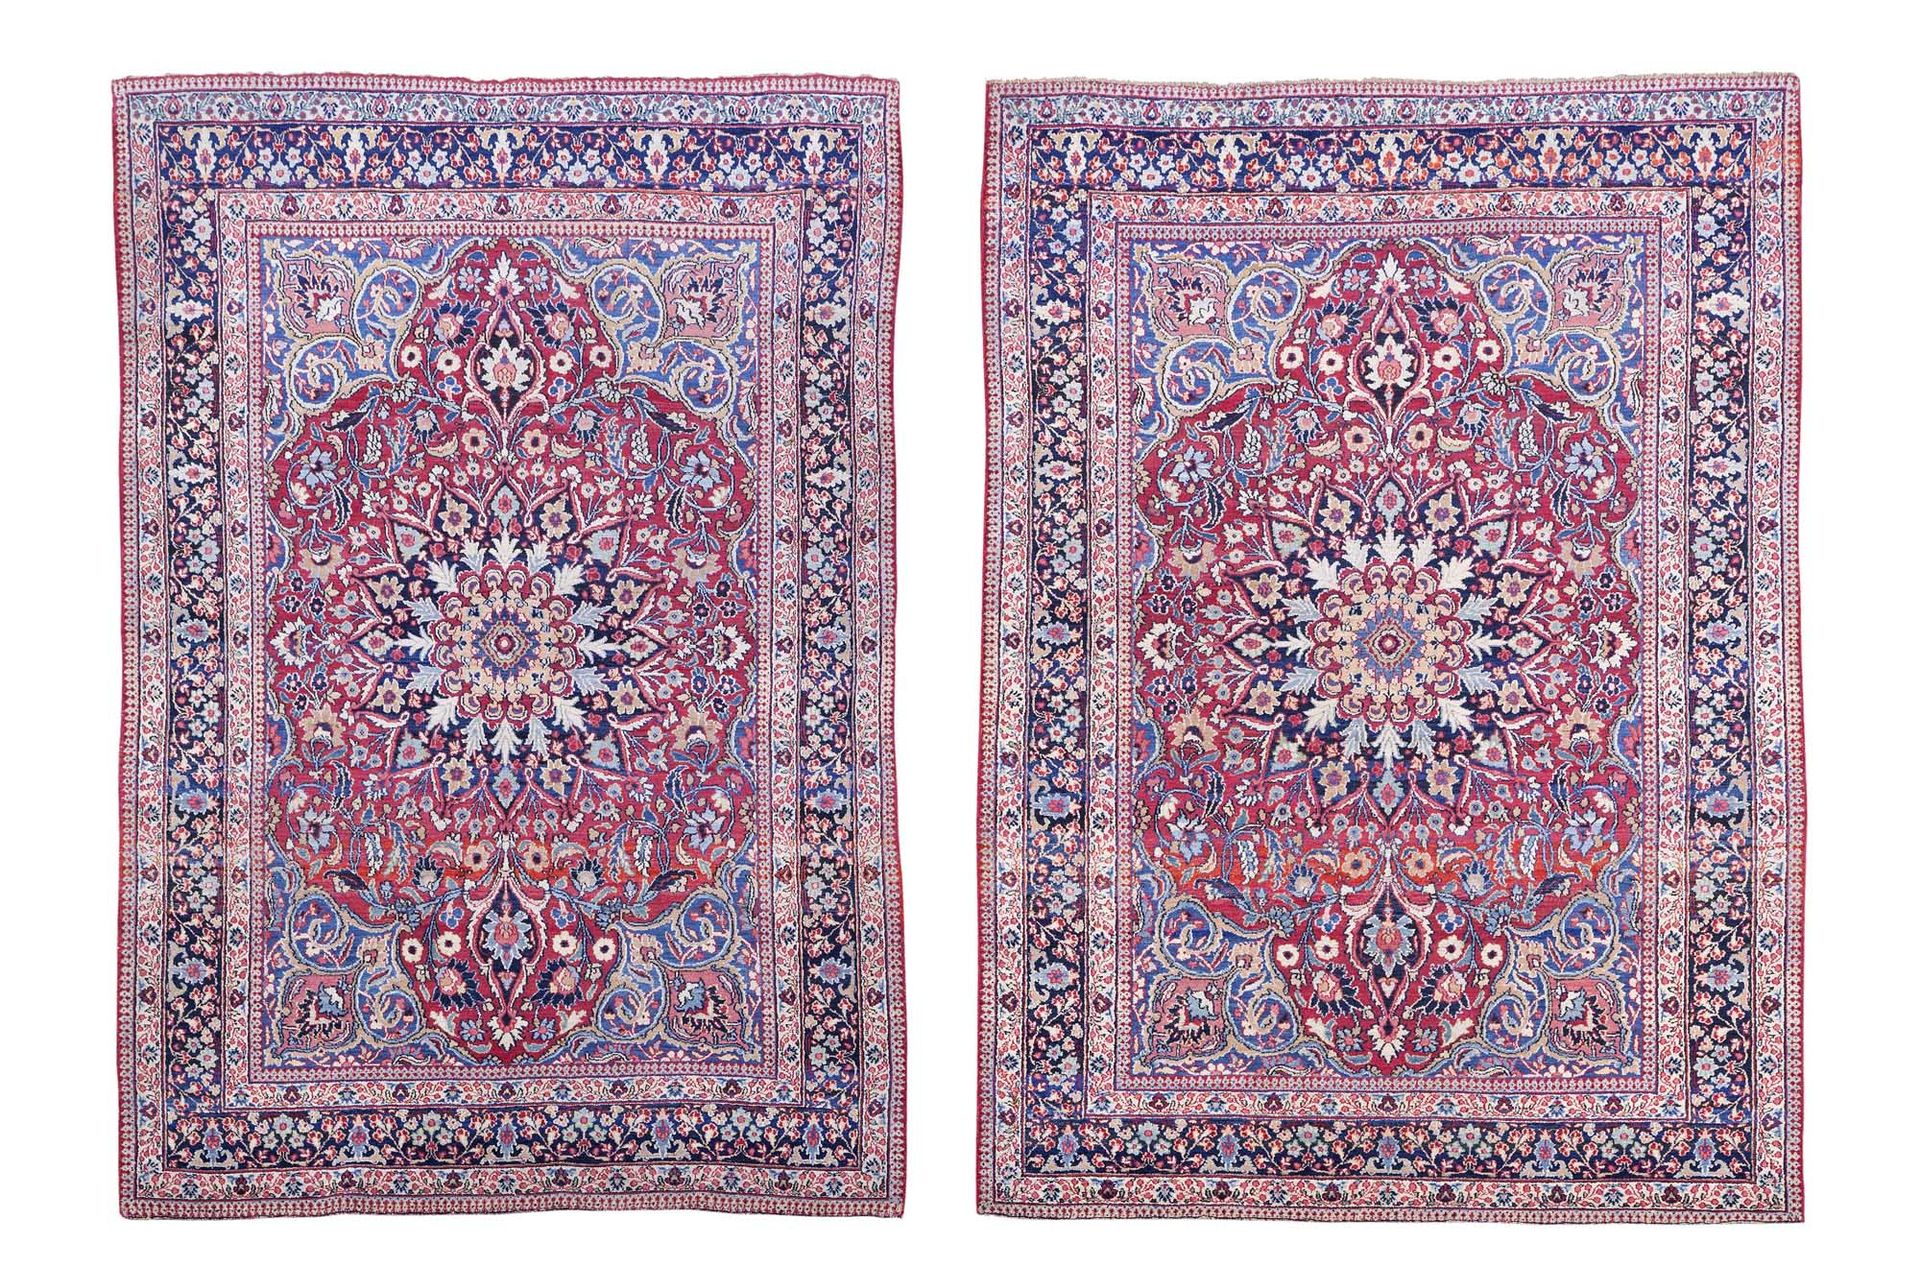 Null Pair of MÉCHED AMOGLI Rugs, (Persia), late 19th century early 20th century
&hellip;